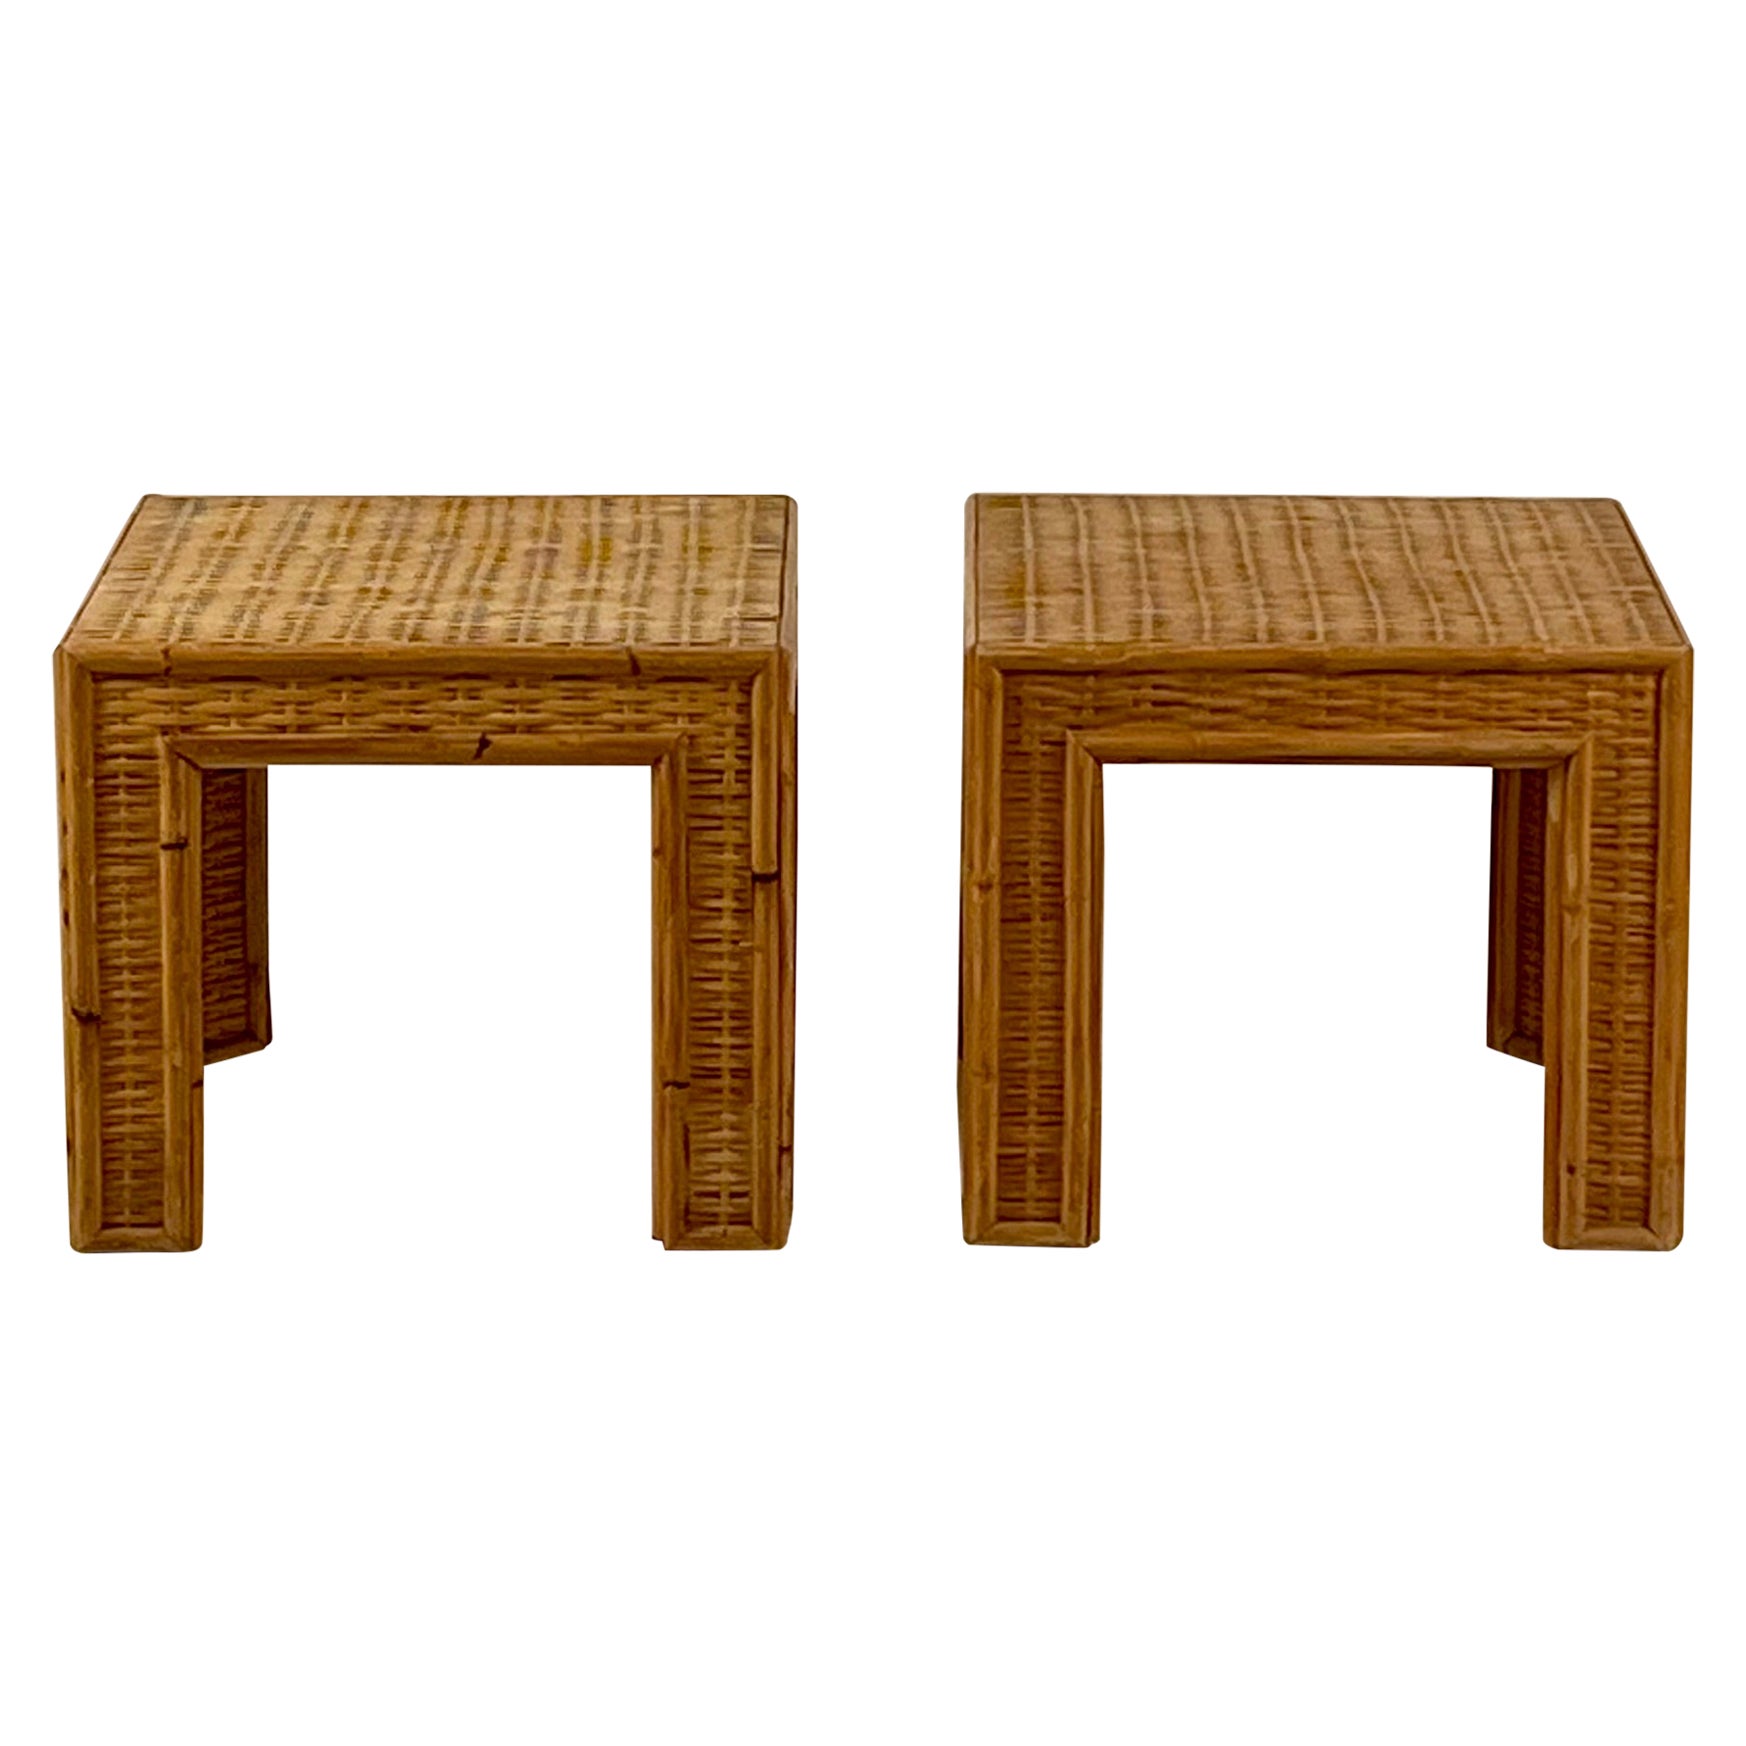 Pair of Thick Custom-Made Rattan and Wicker End Tables For Sale